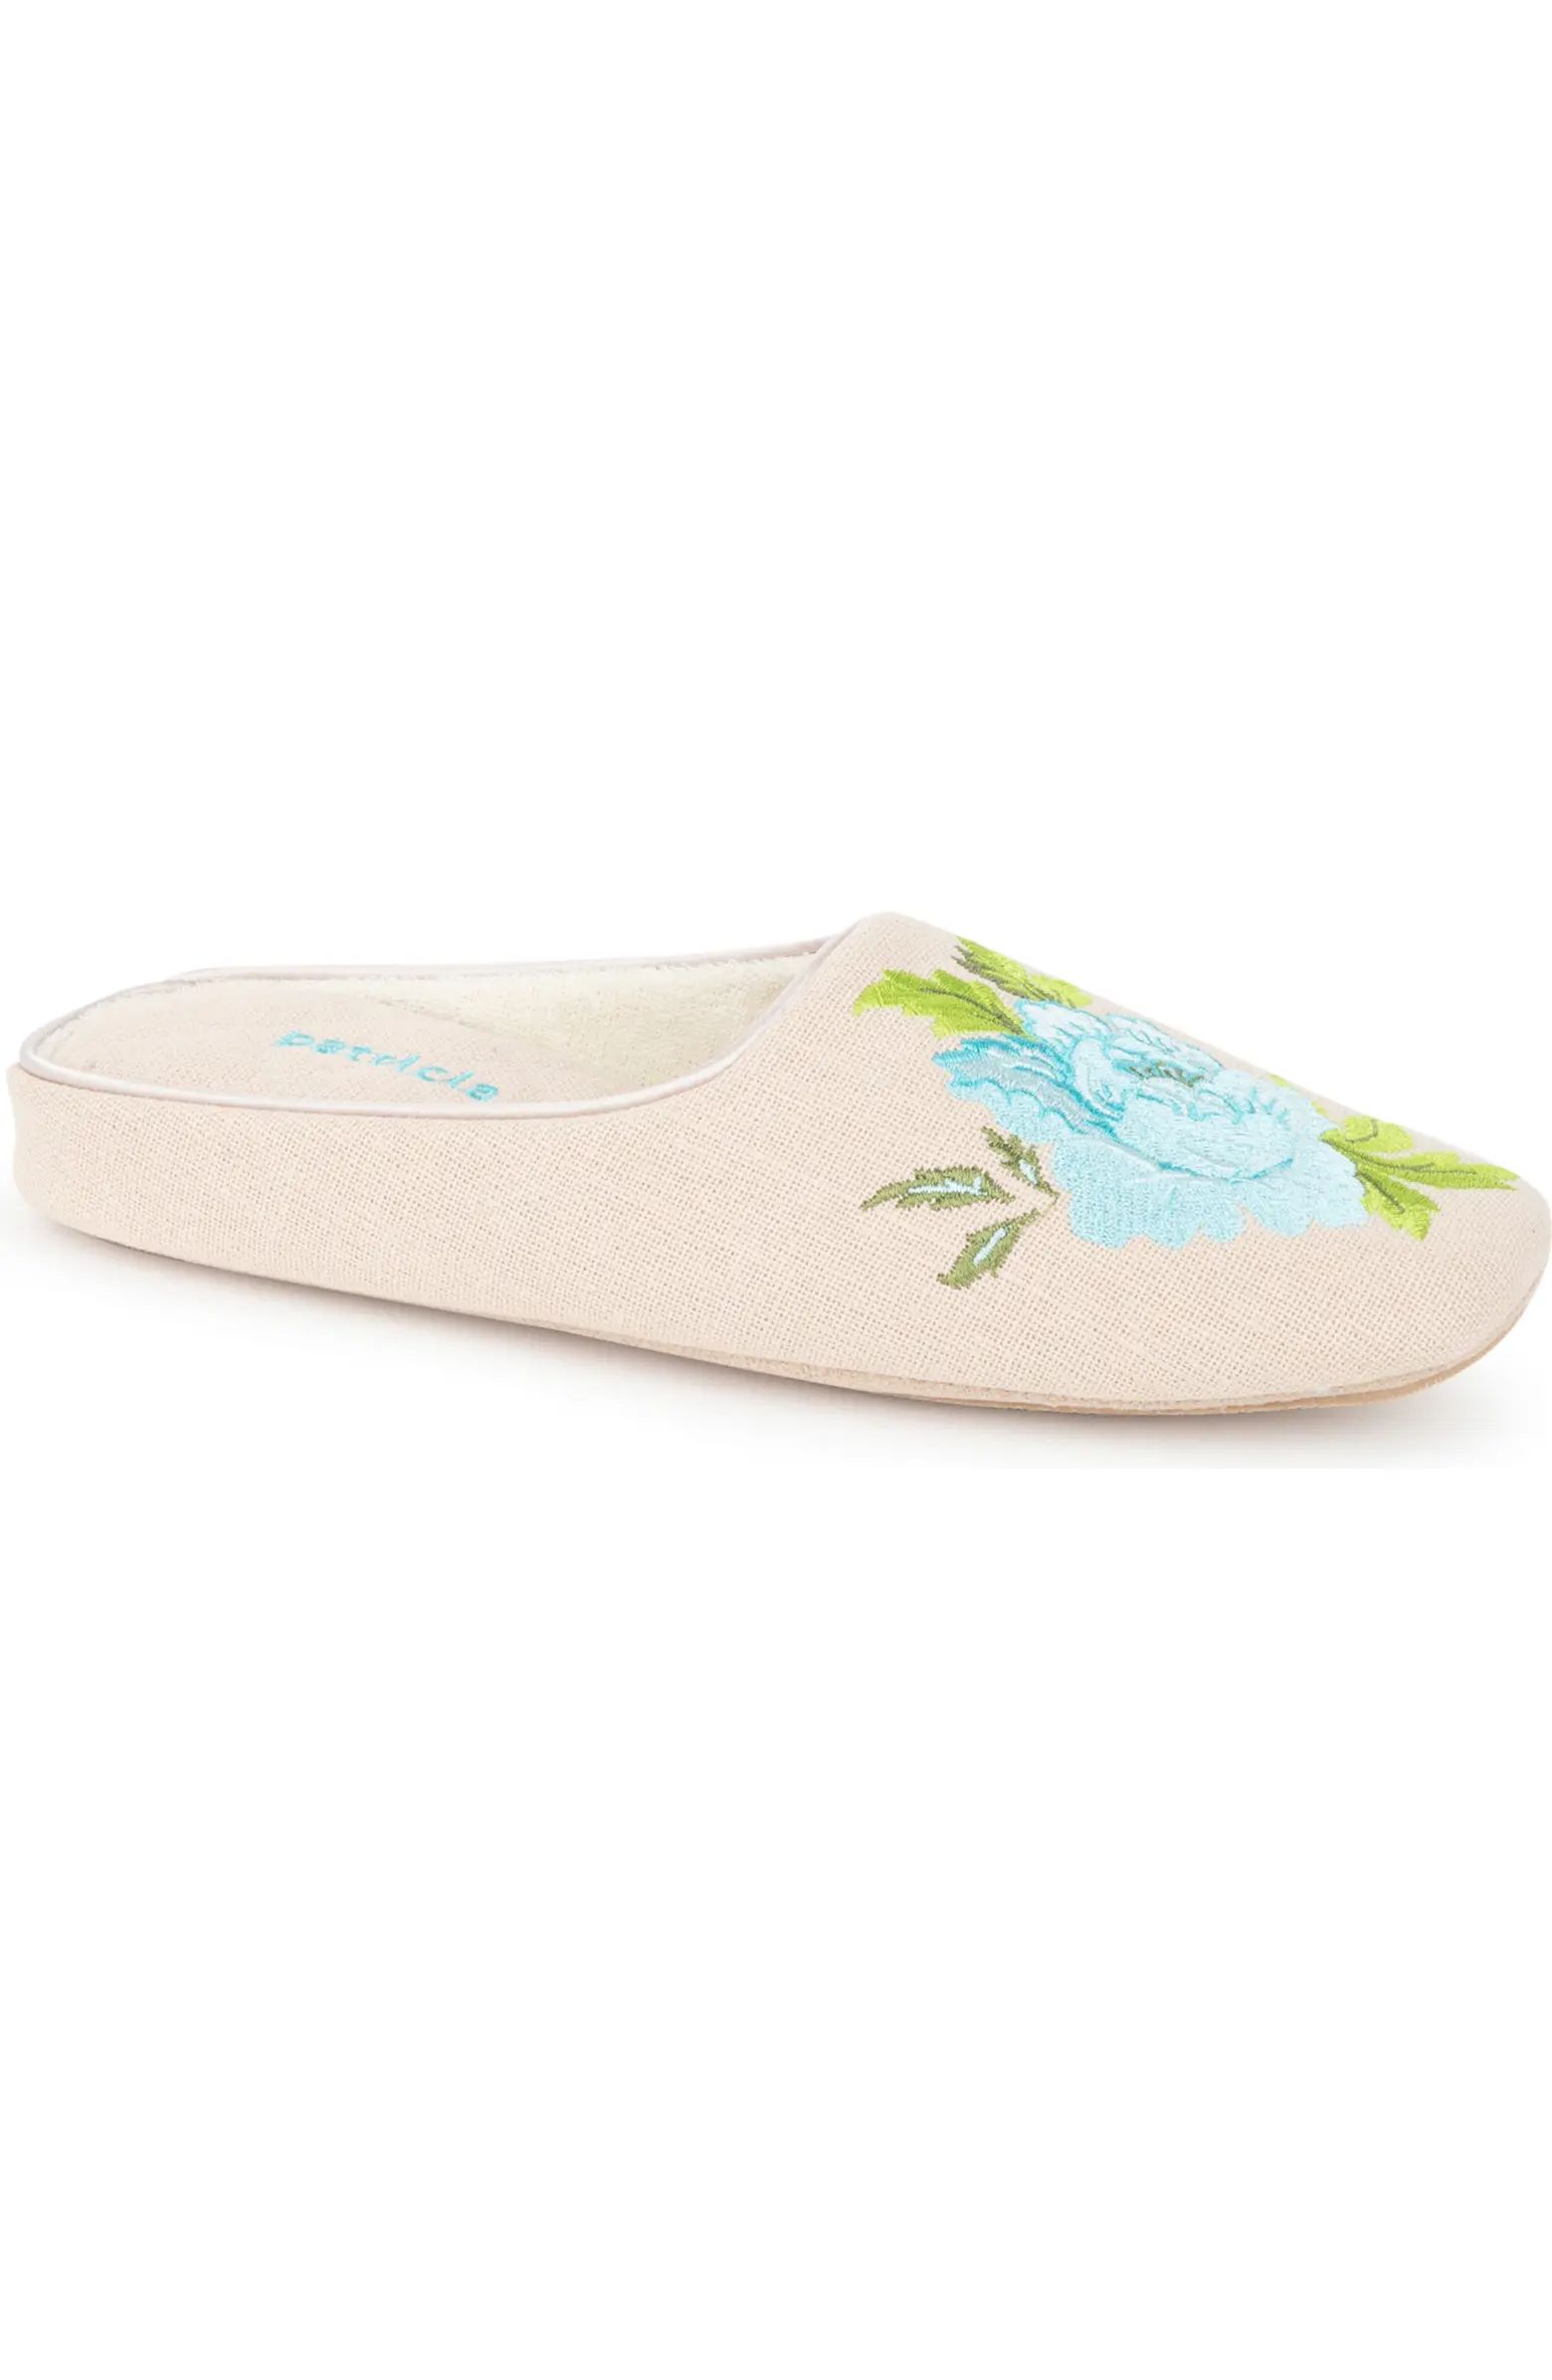 Embroidered Peony Slipper (Women) | Nordstrom